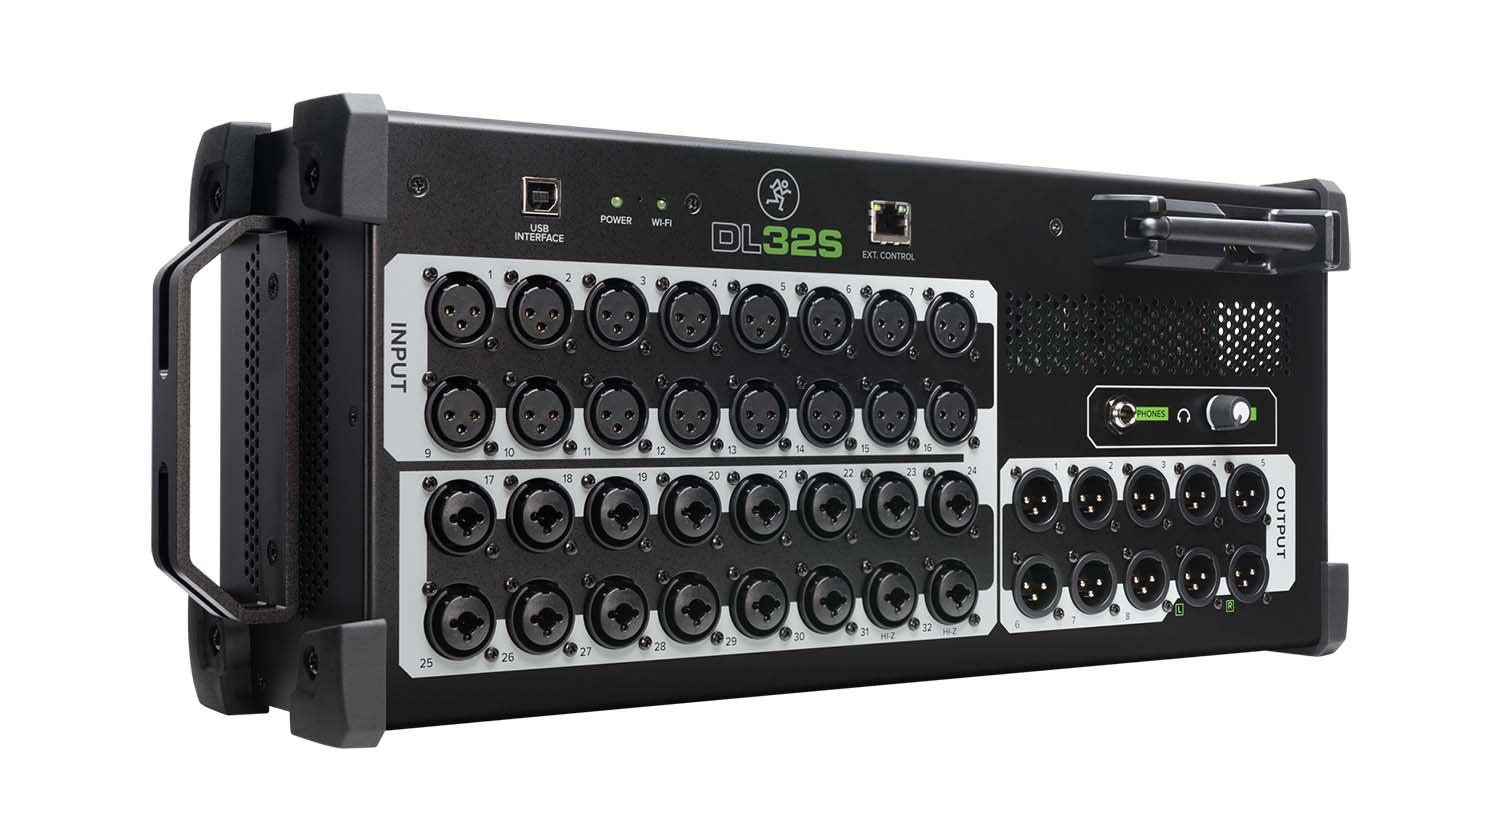 B-Stock: Mackie DL32S 32-Channel Wireless Digital Live Sound Mixer with Built-In Wi-Fi for Multi-Platform Control by Mackie